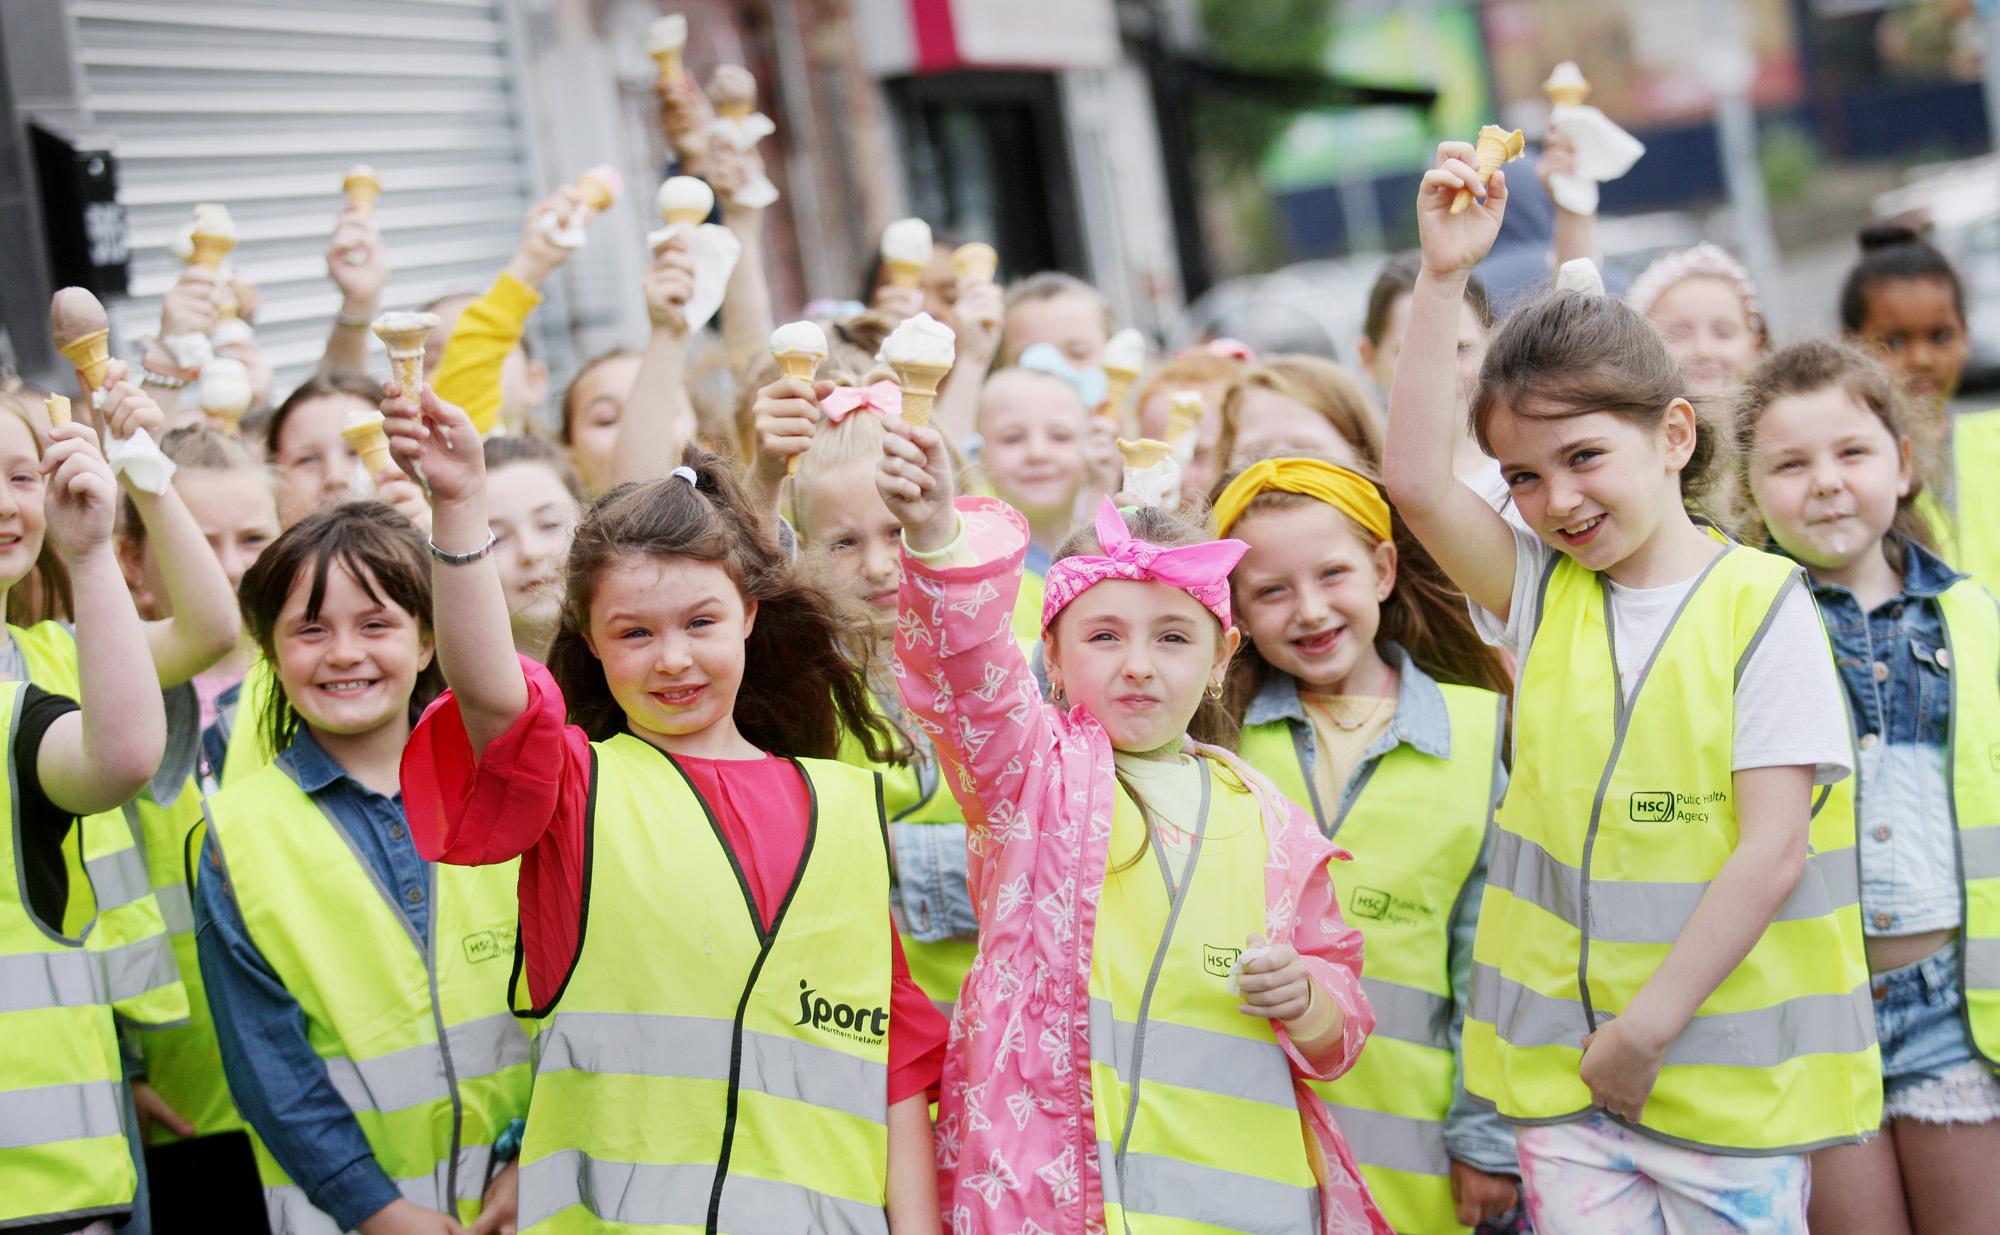 Girls from Mercy PS Summer Scheme in Ardoyne cool down with ice cream as the temperature rose